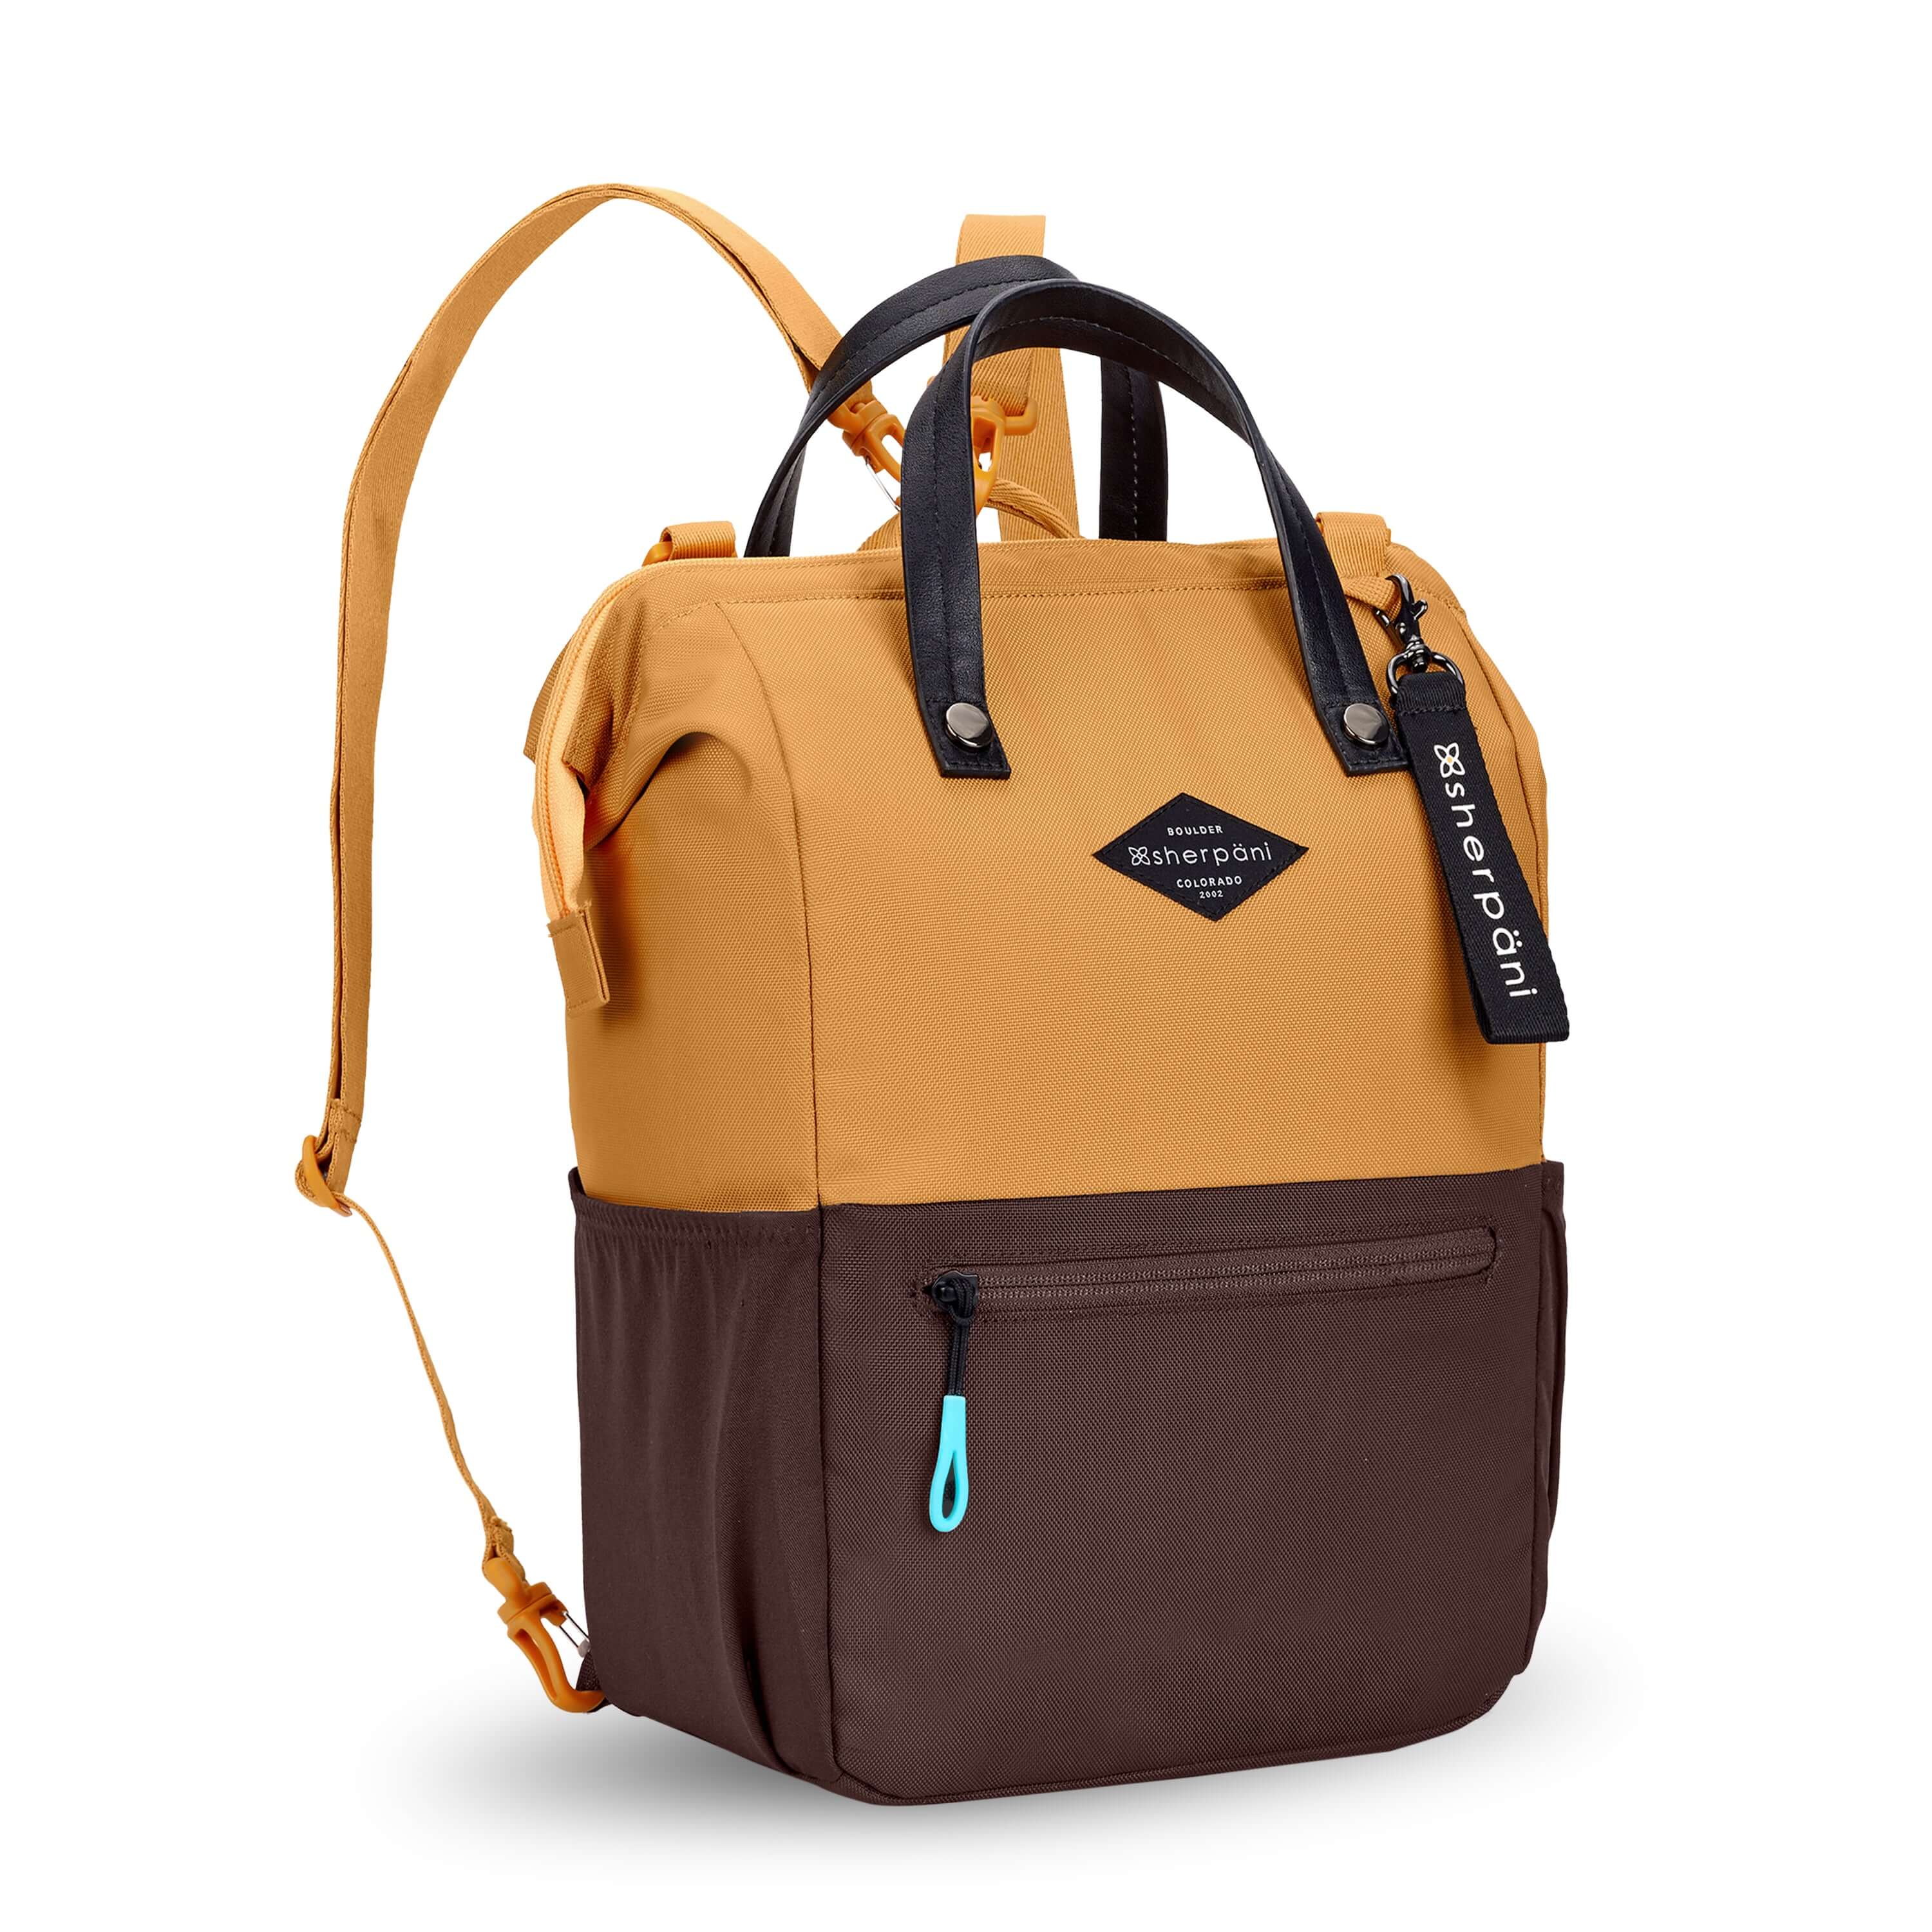 Angled front view of Sherpani three in one bag, the Dispatch in Sundial. The bag is two toned: the top is burnt yellow and the bottom is brown. There is an external zipper pocket on the front panel. Easy pull zippers are accented in aqua. A branded Sherpani keychain is clipped to the upper right corner. Elastic water bottle holders sit on either side of the bag. It has short tote handles and adjustable/detachable straps that can function for a backpack or crossbody. #color_sundial v1